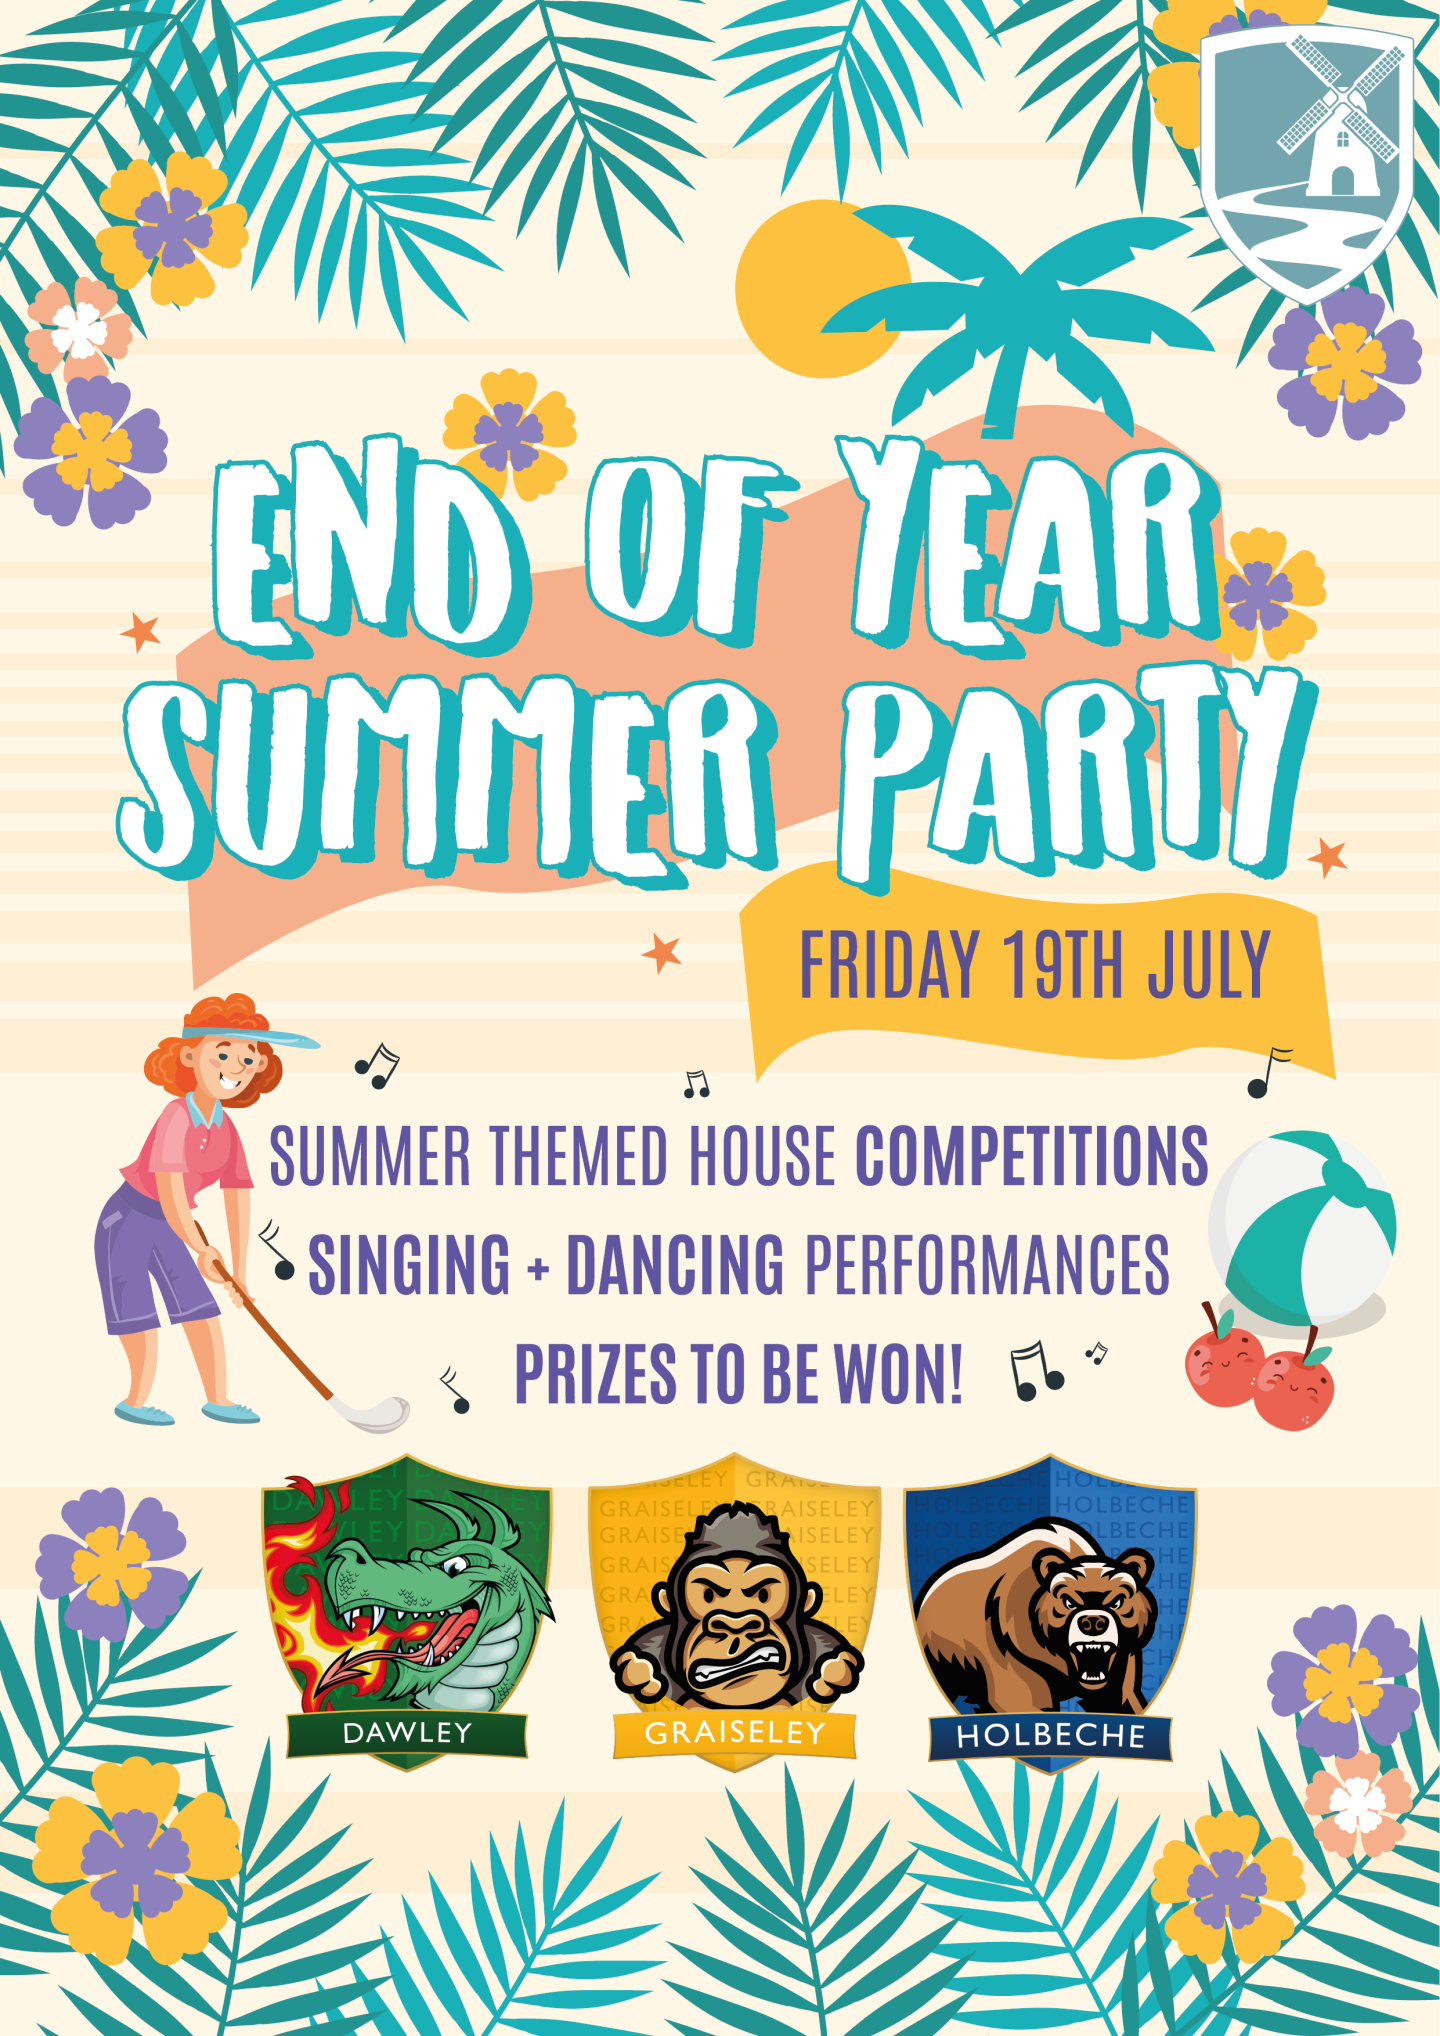 smestow-end-of-year-summer-party